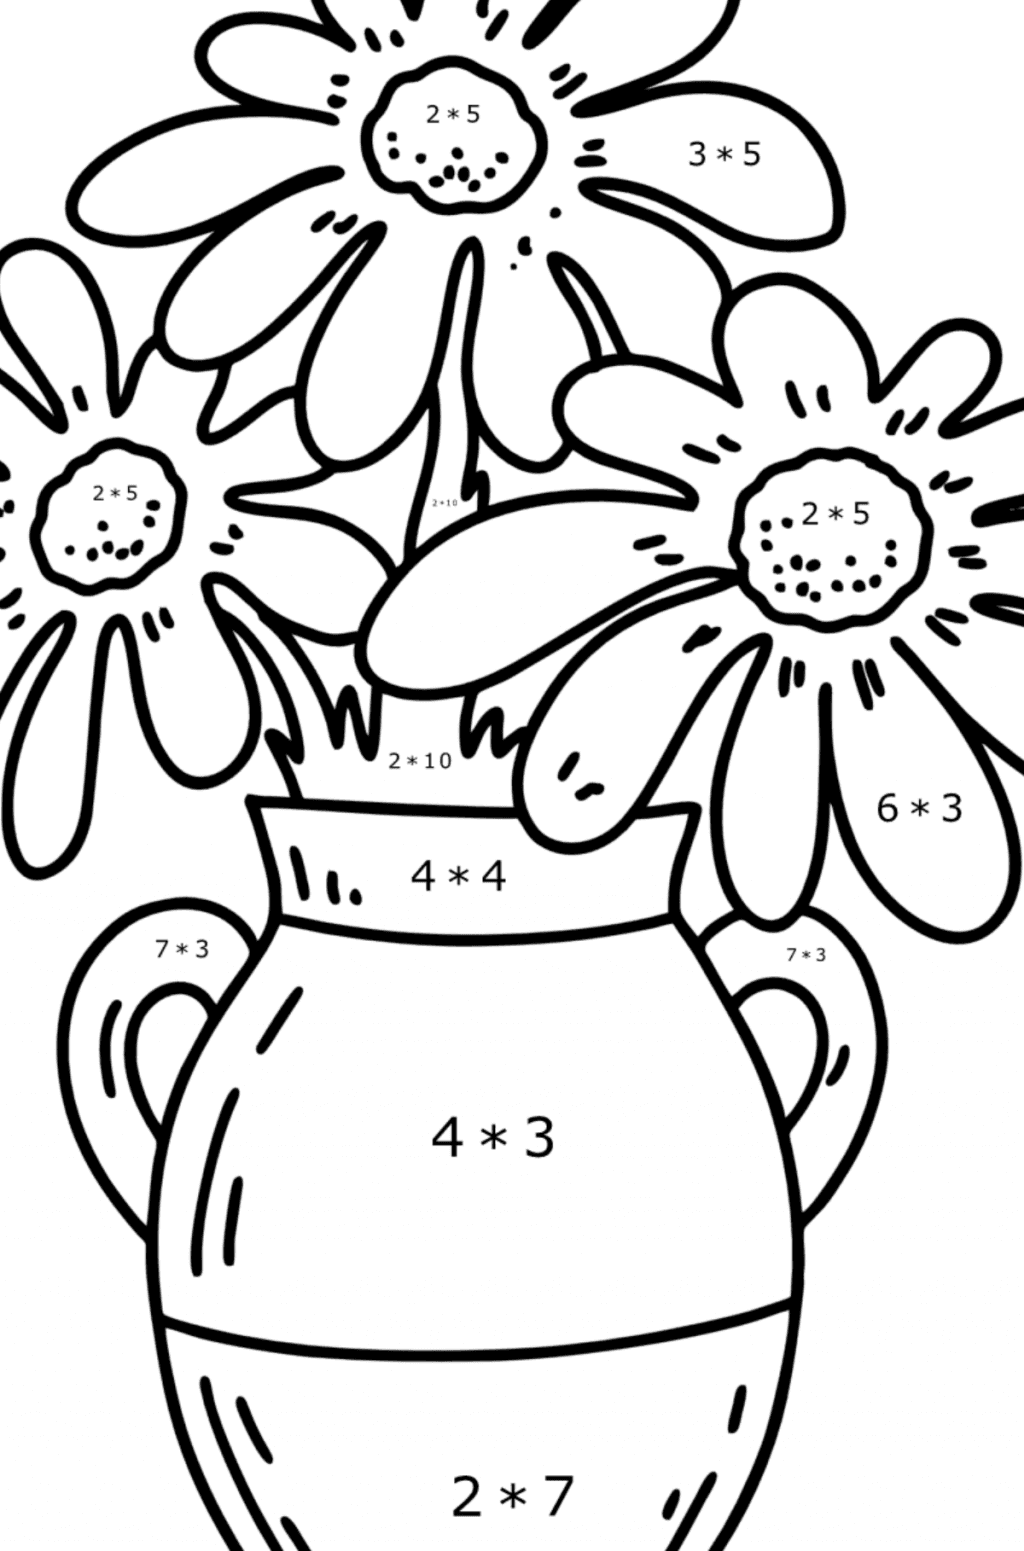 25-marvelous-image-of-multiplication-coloring-pages-davemelillo